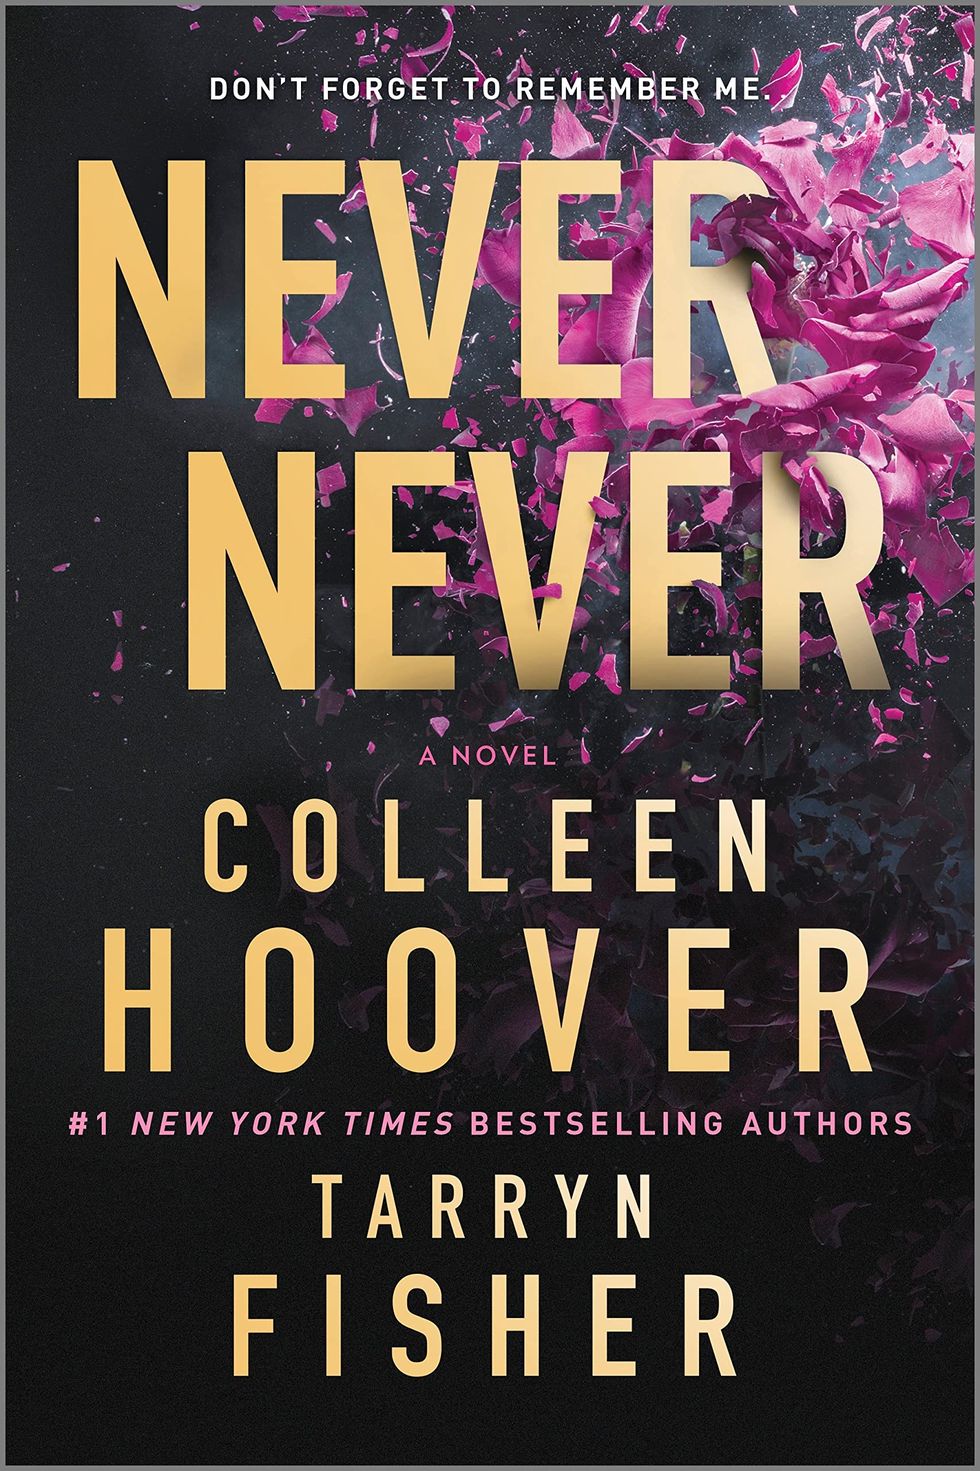 All 24 Colleen Hoover Books Ranked